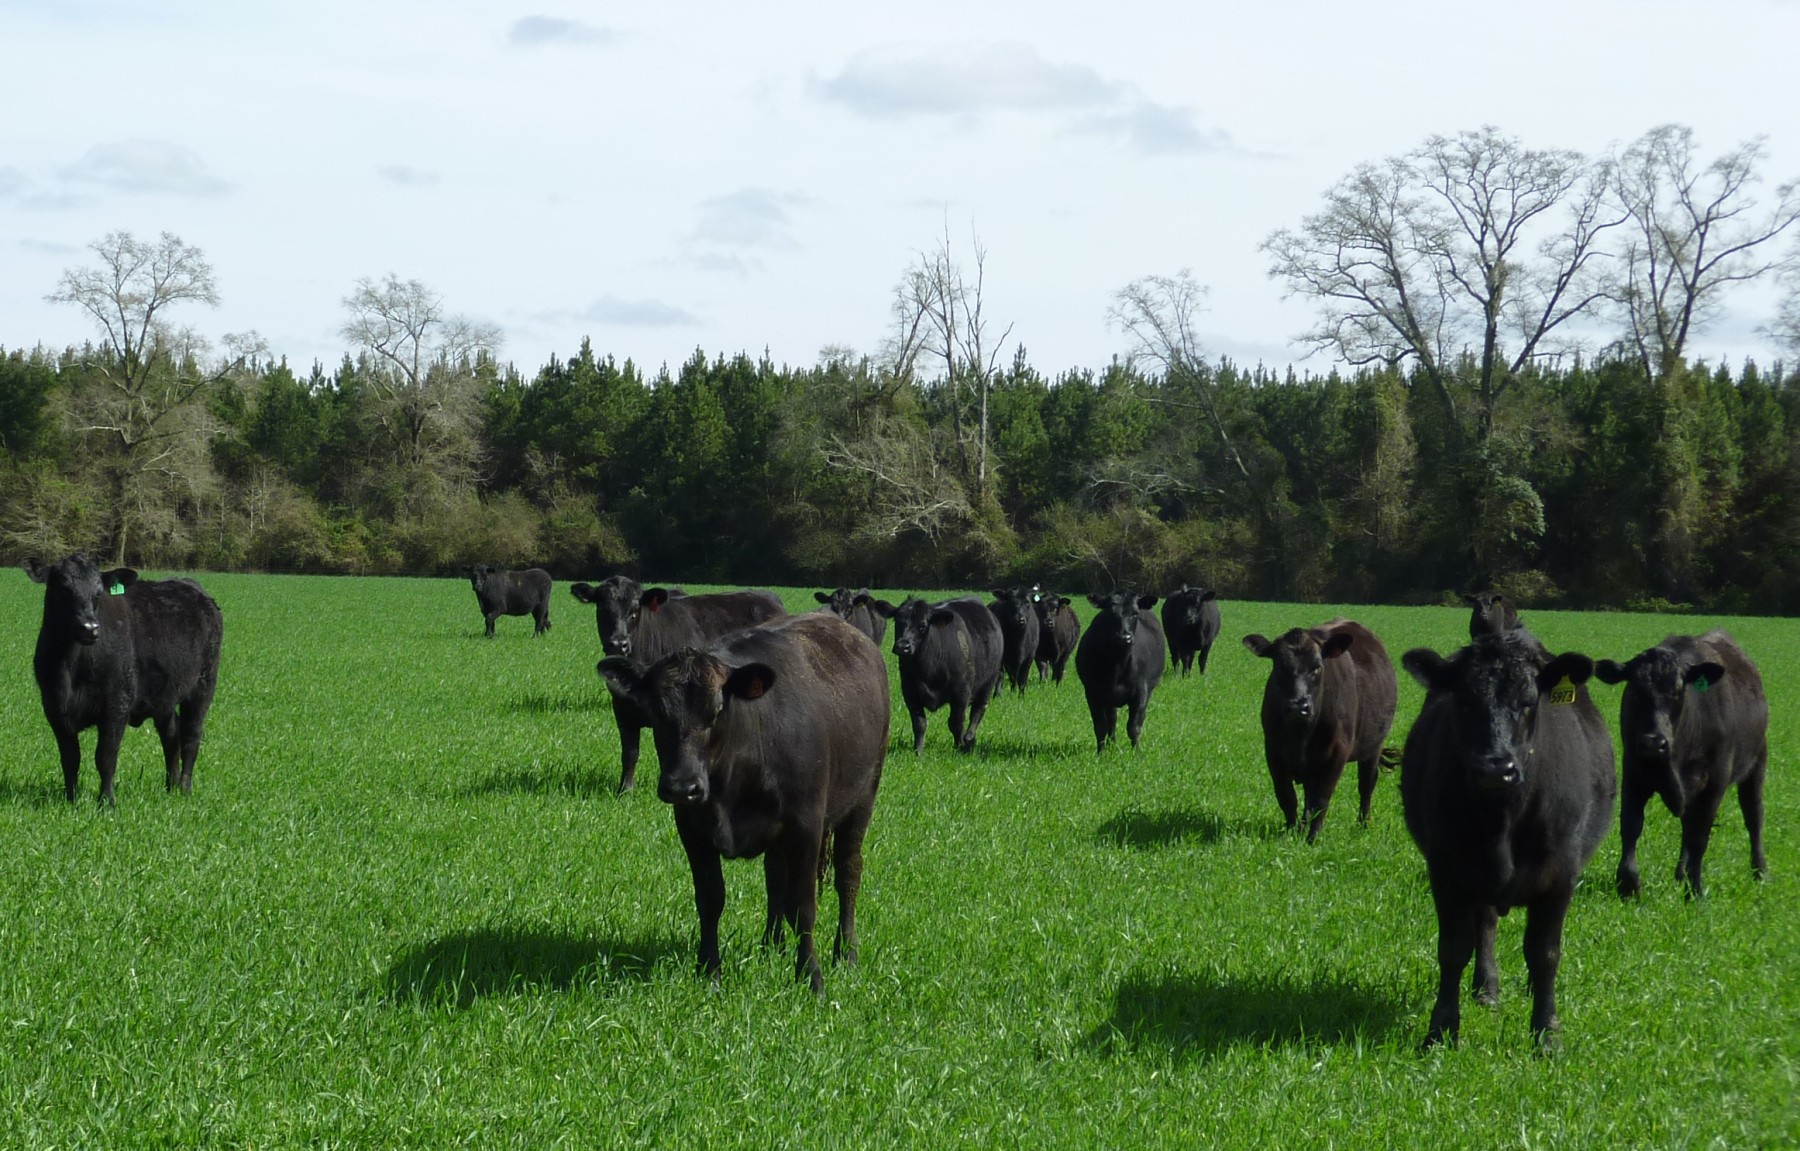 Edison Heifers standing in a lush green pasture with trees in the background.